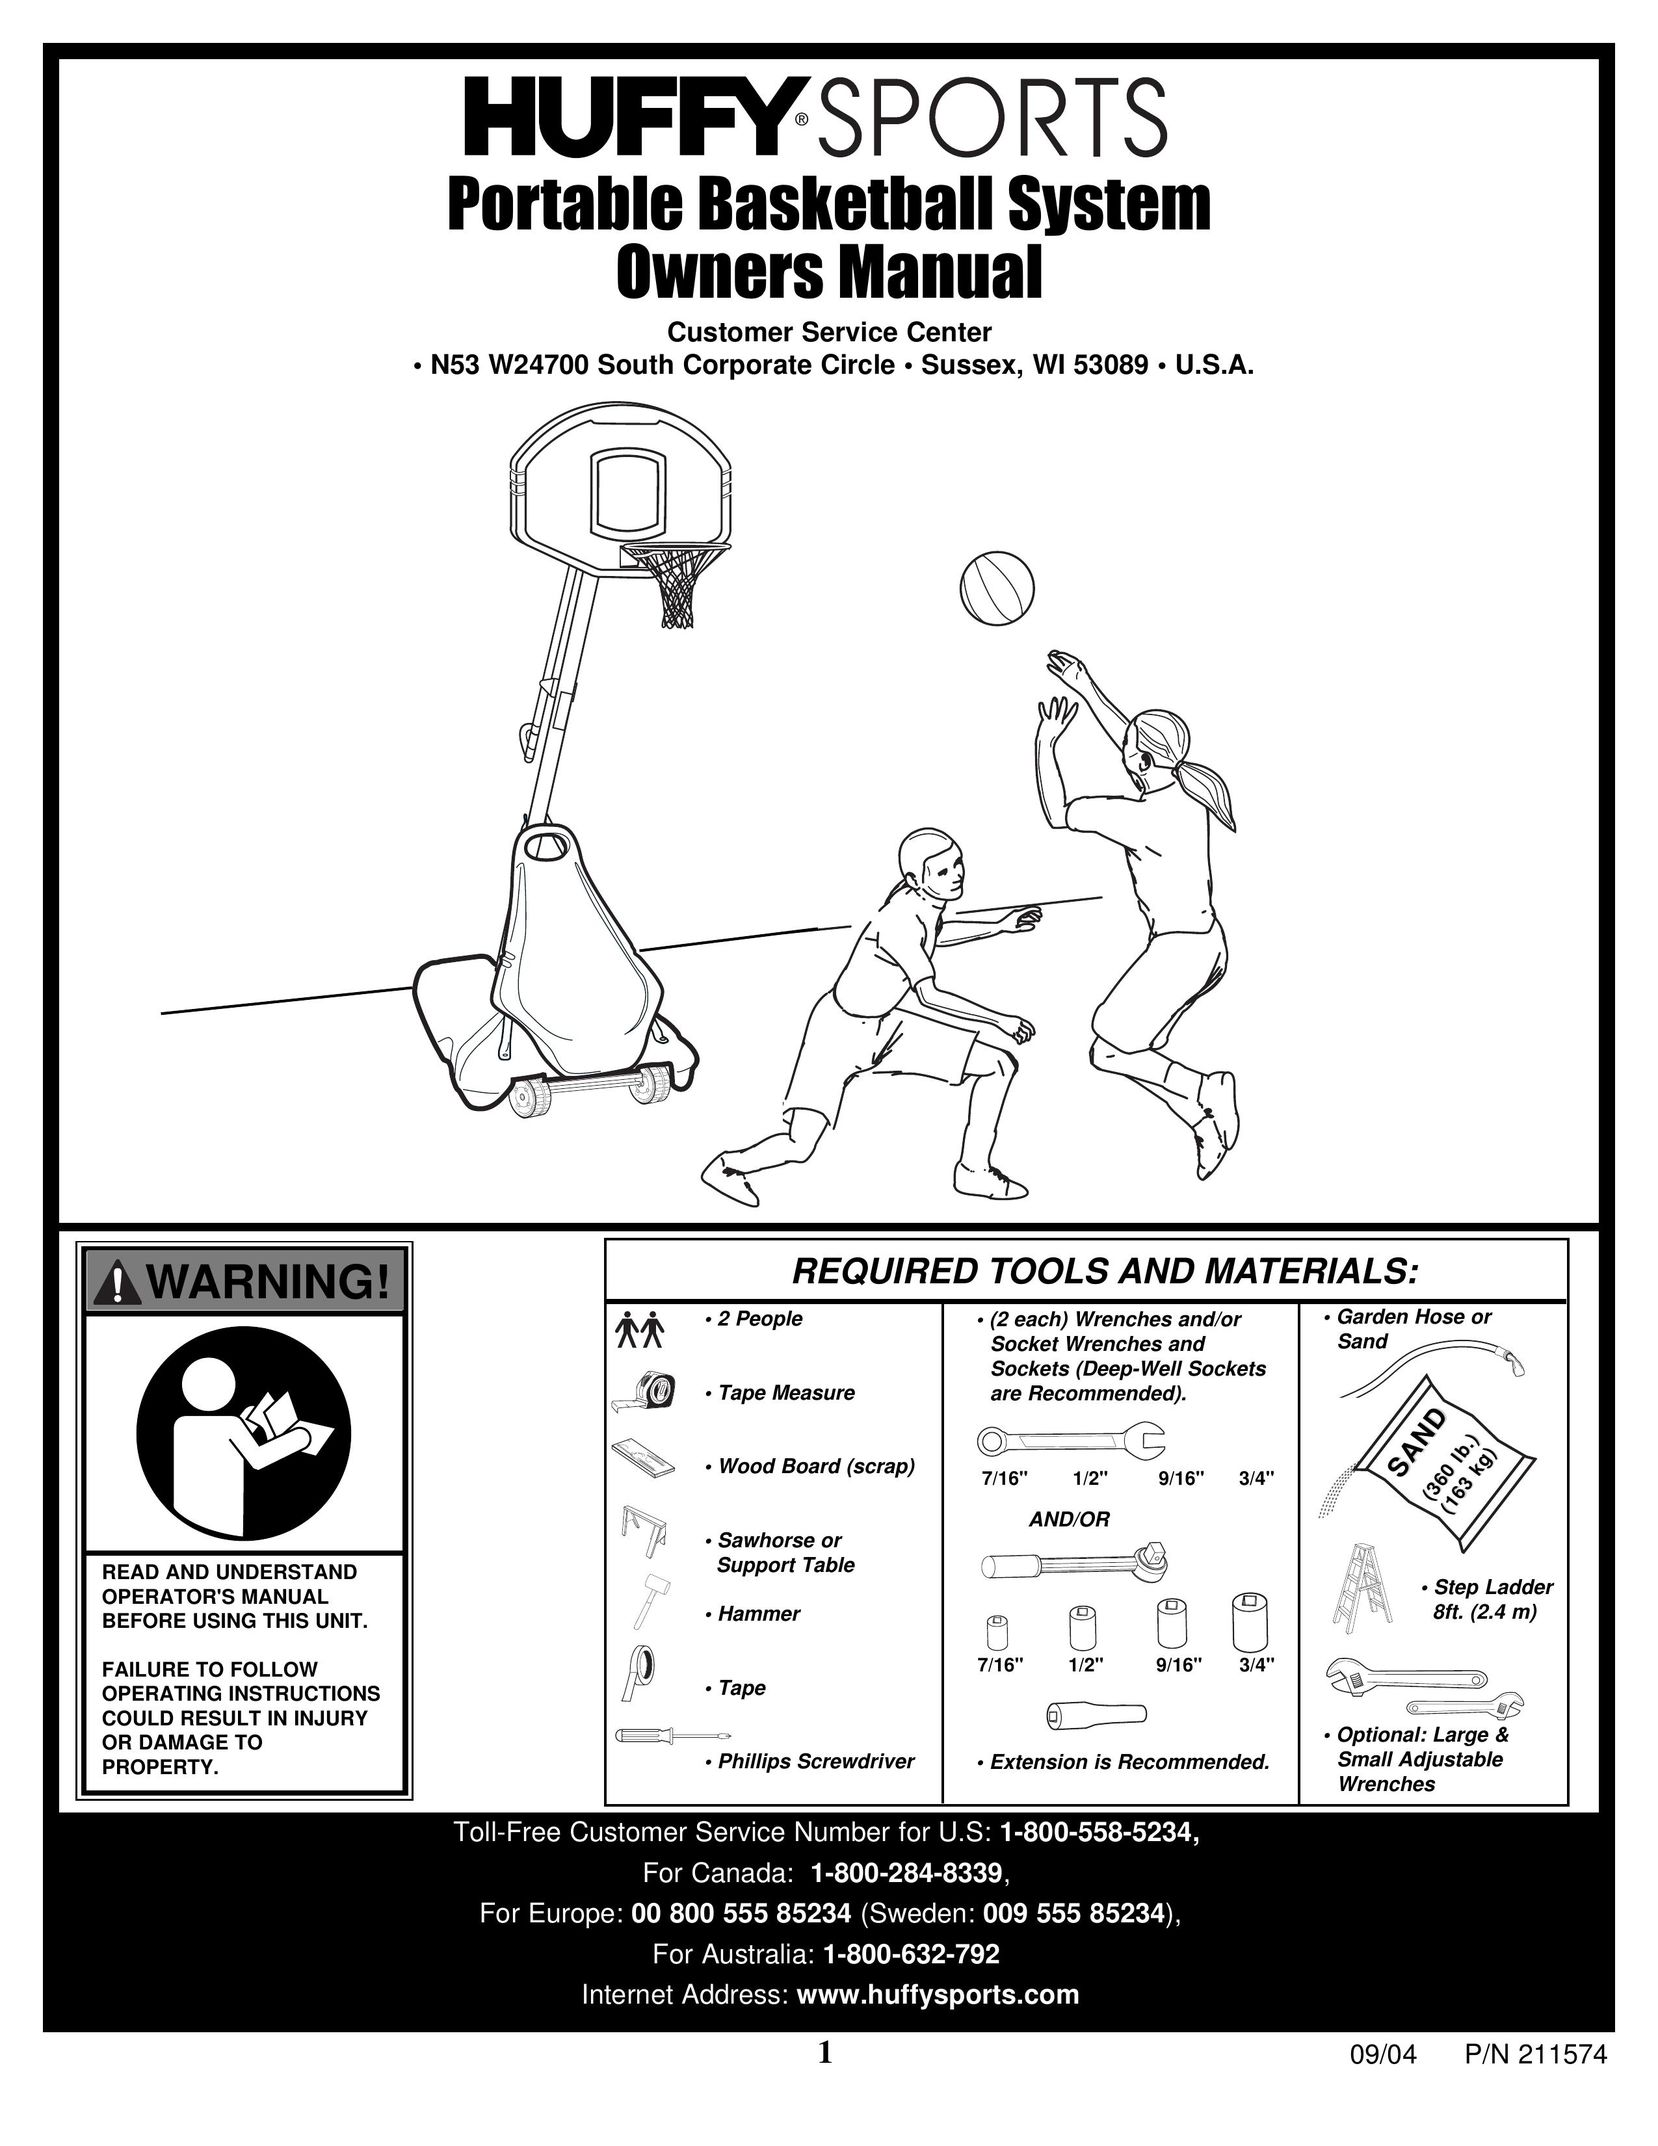 Huffy N53 W24700 Board Games User Manual (Page 1)